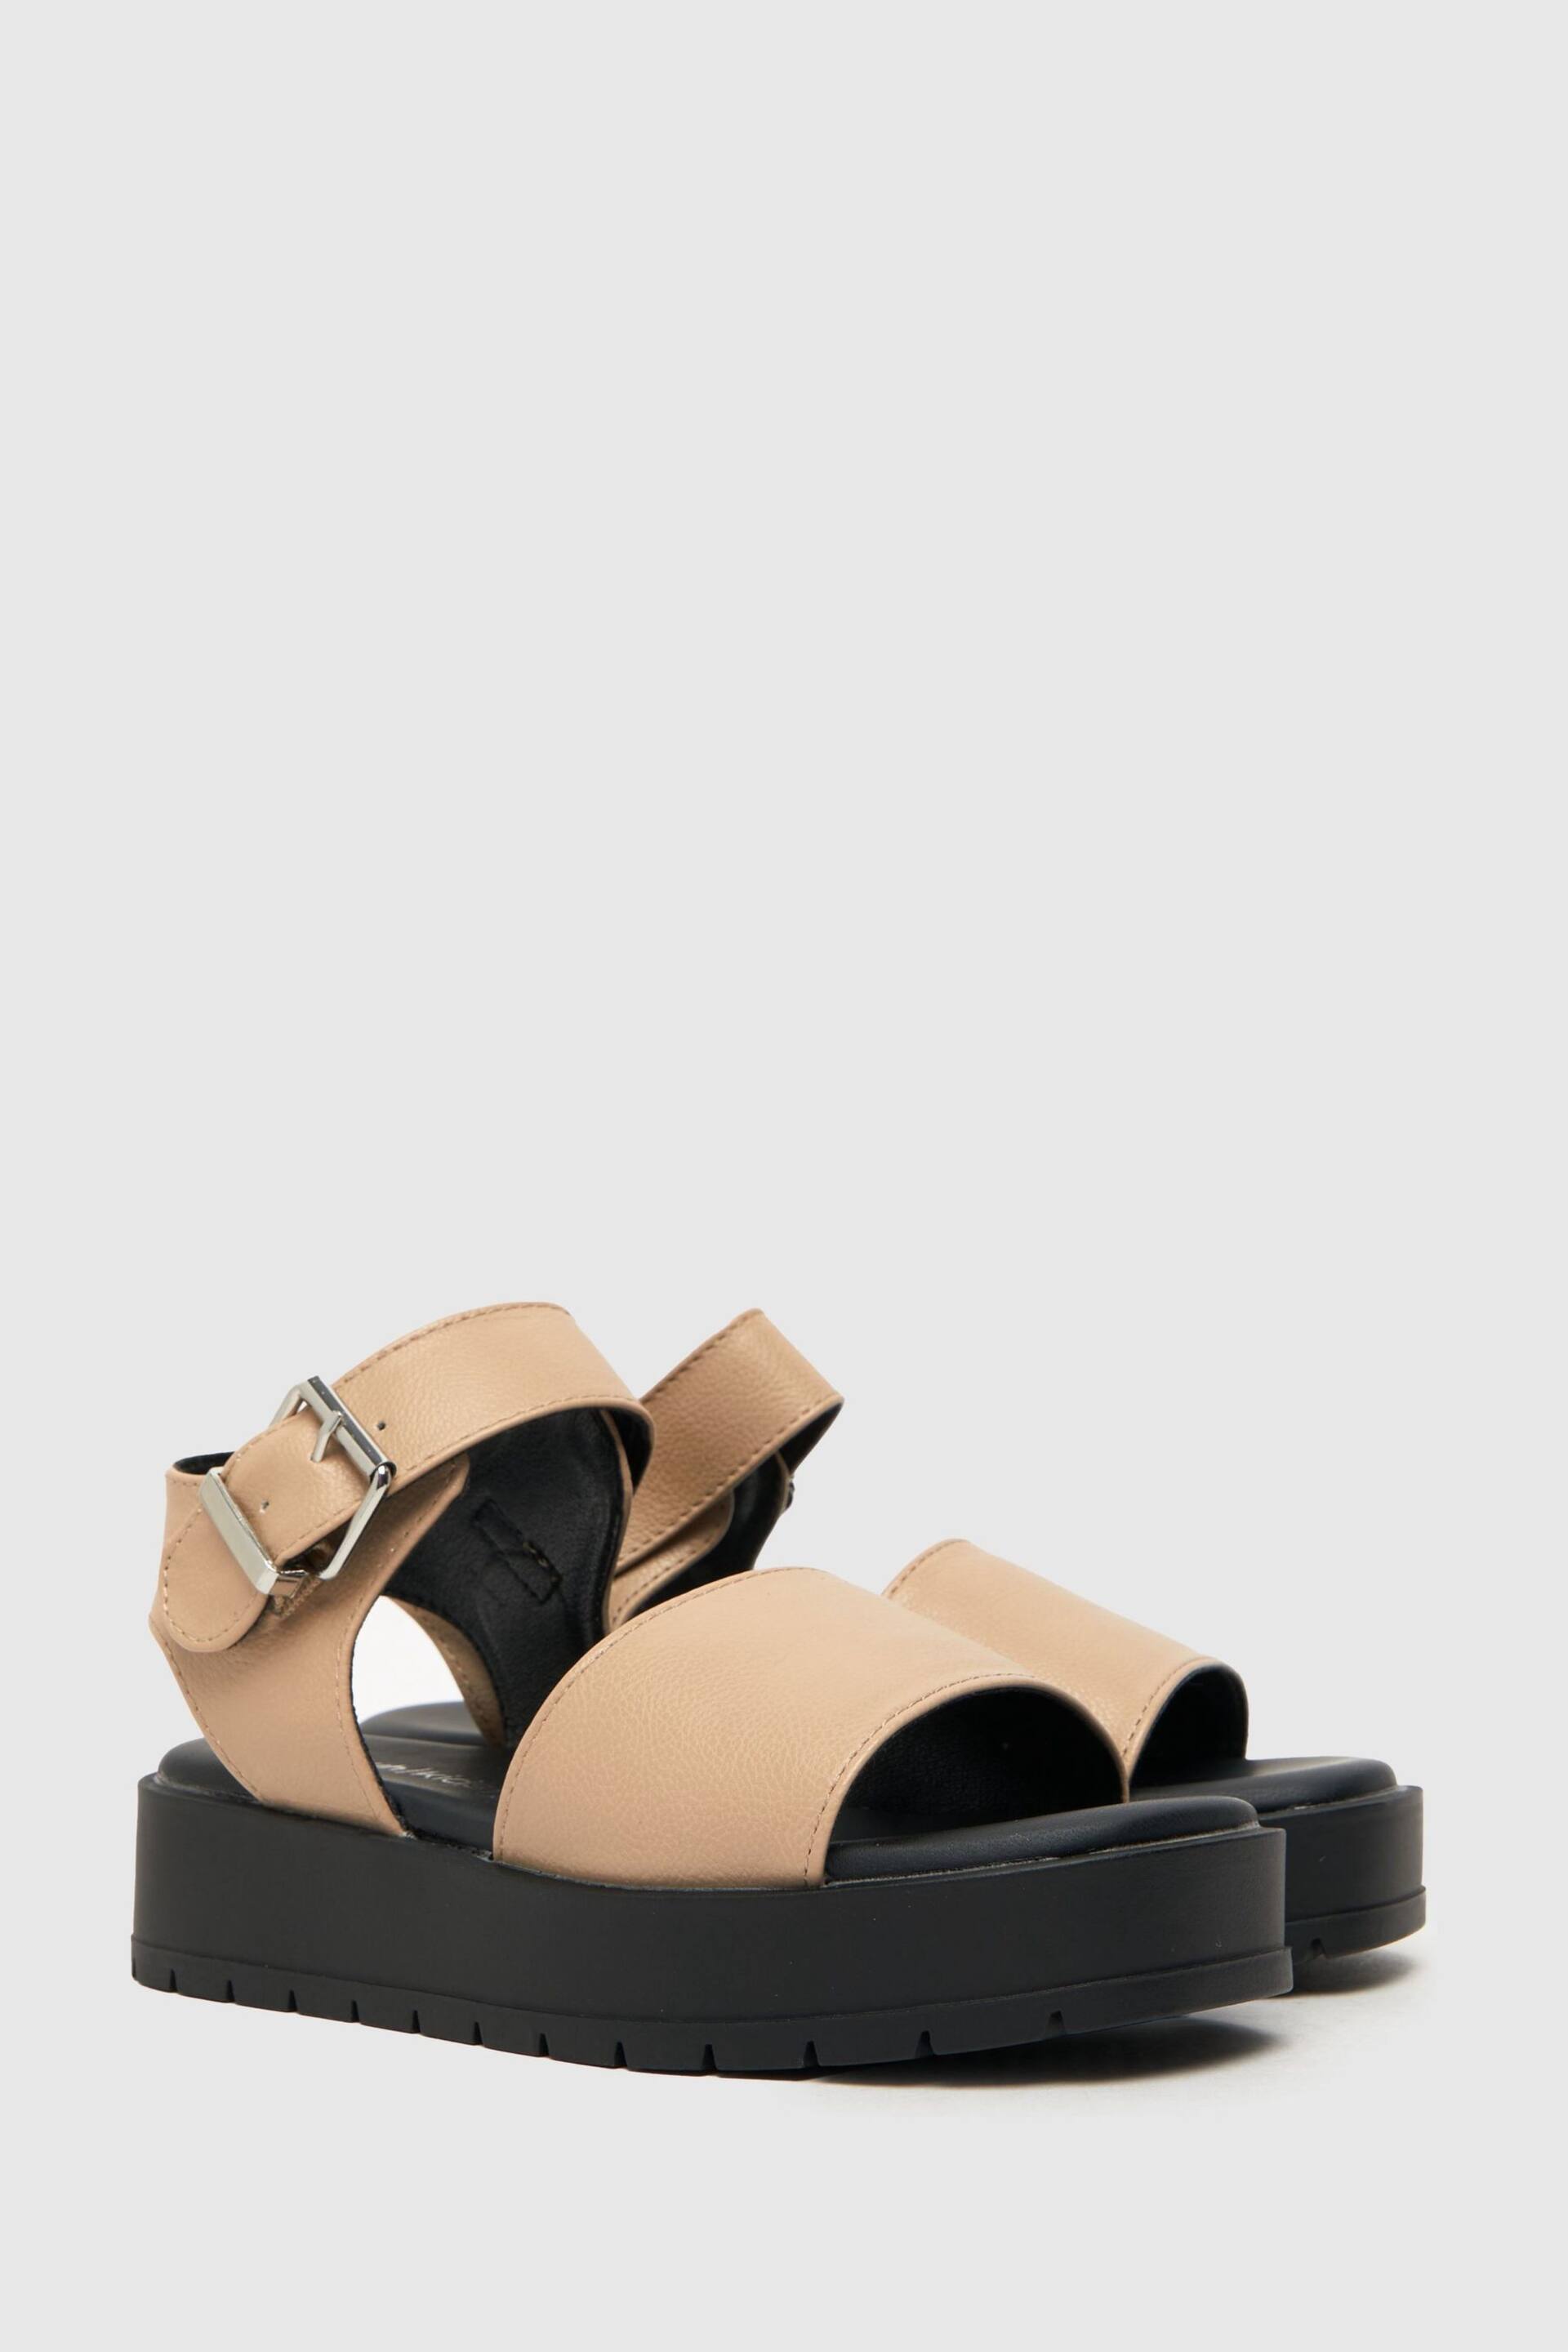 Schuh Junior Trixie Chunky Sandals - Image 2 of 4